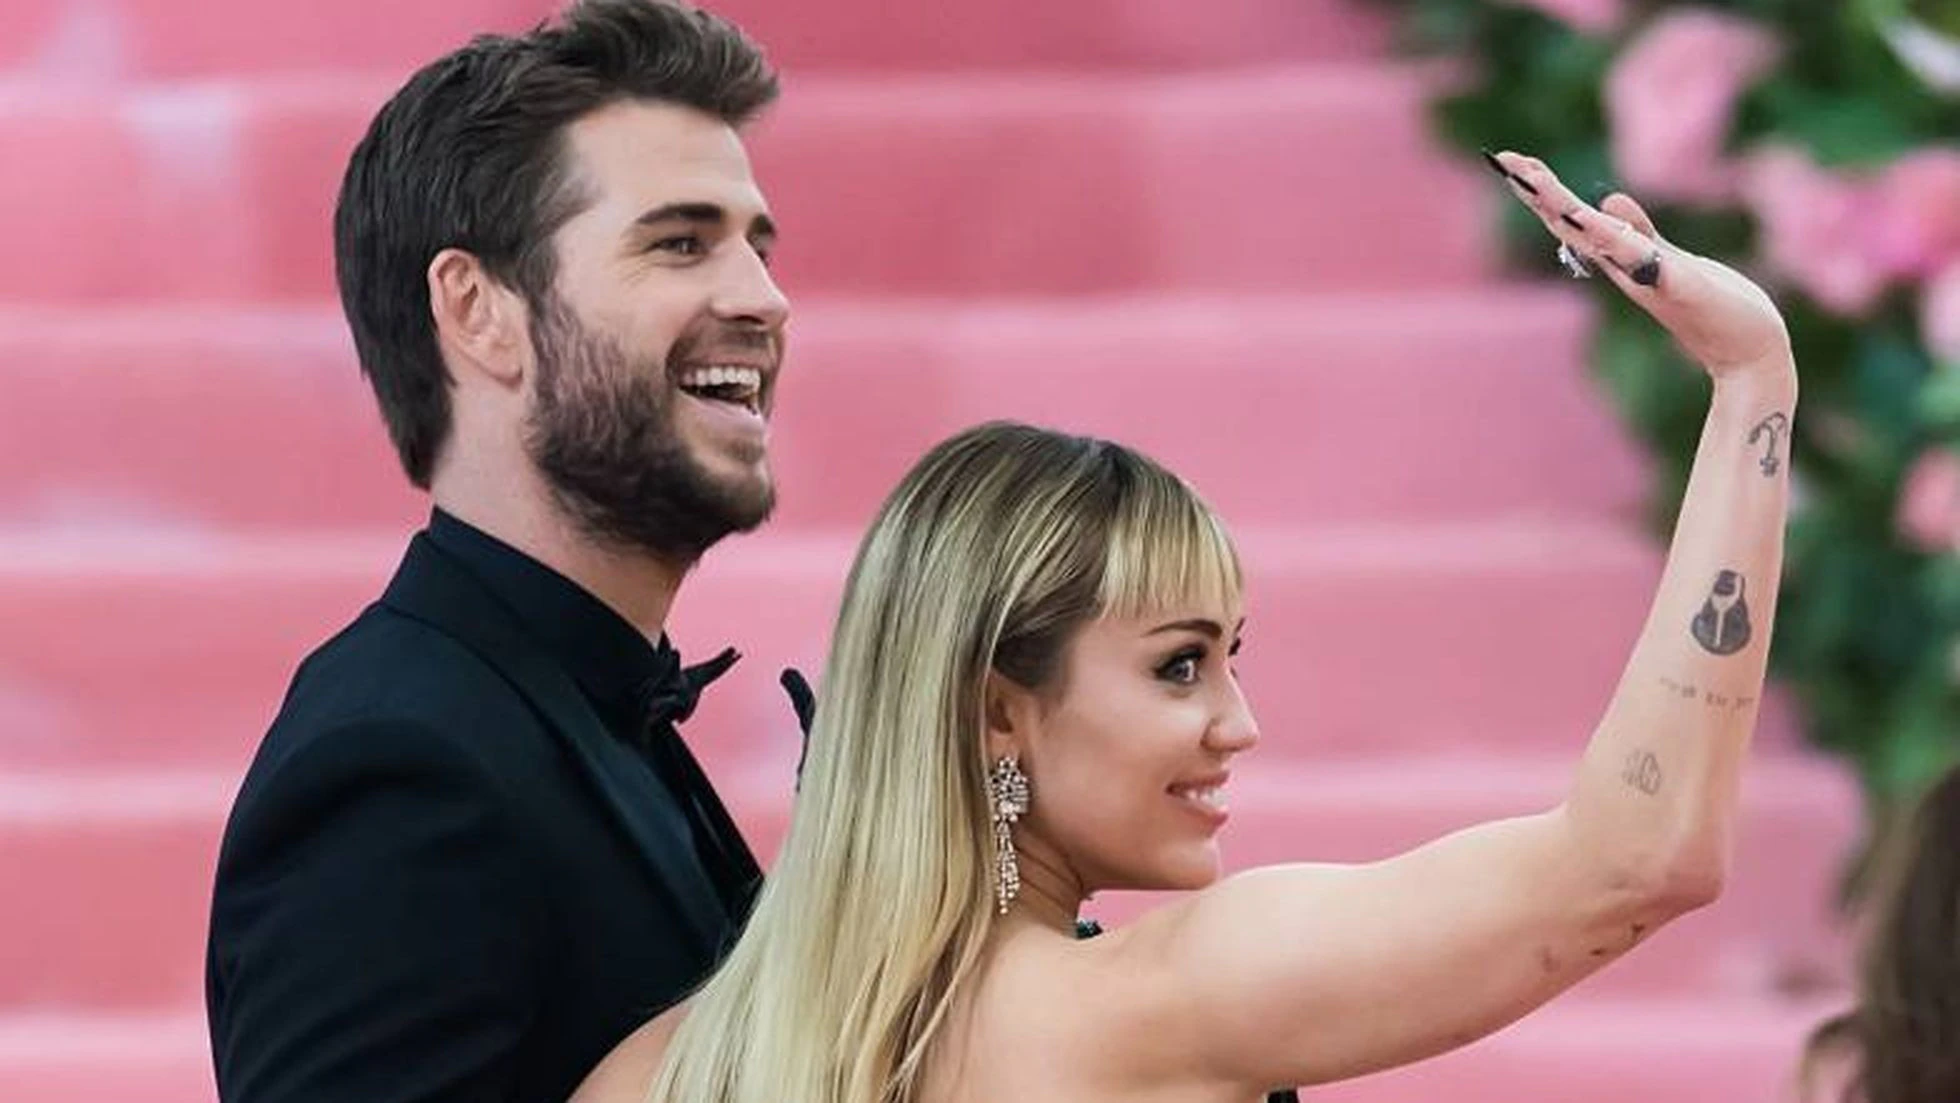 Relationship History of Liam Hemsworth and Miley Cyrus